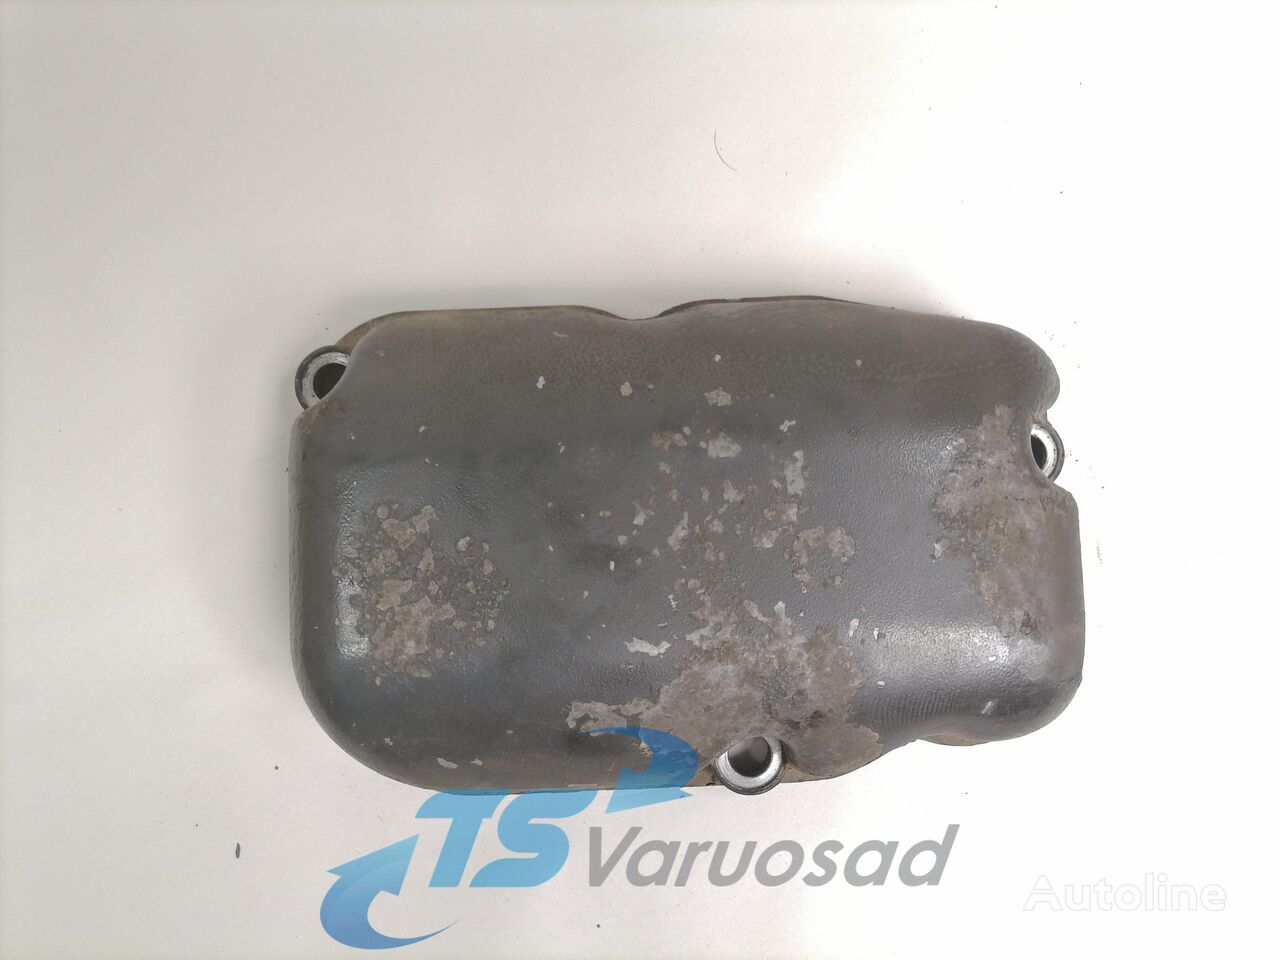 Scania Valve cover 1491697 for Scania R420 truck tractor